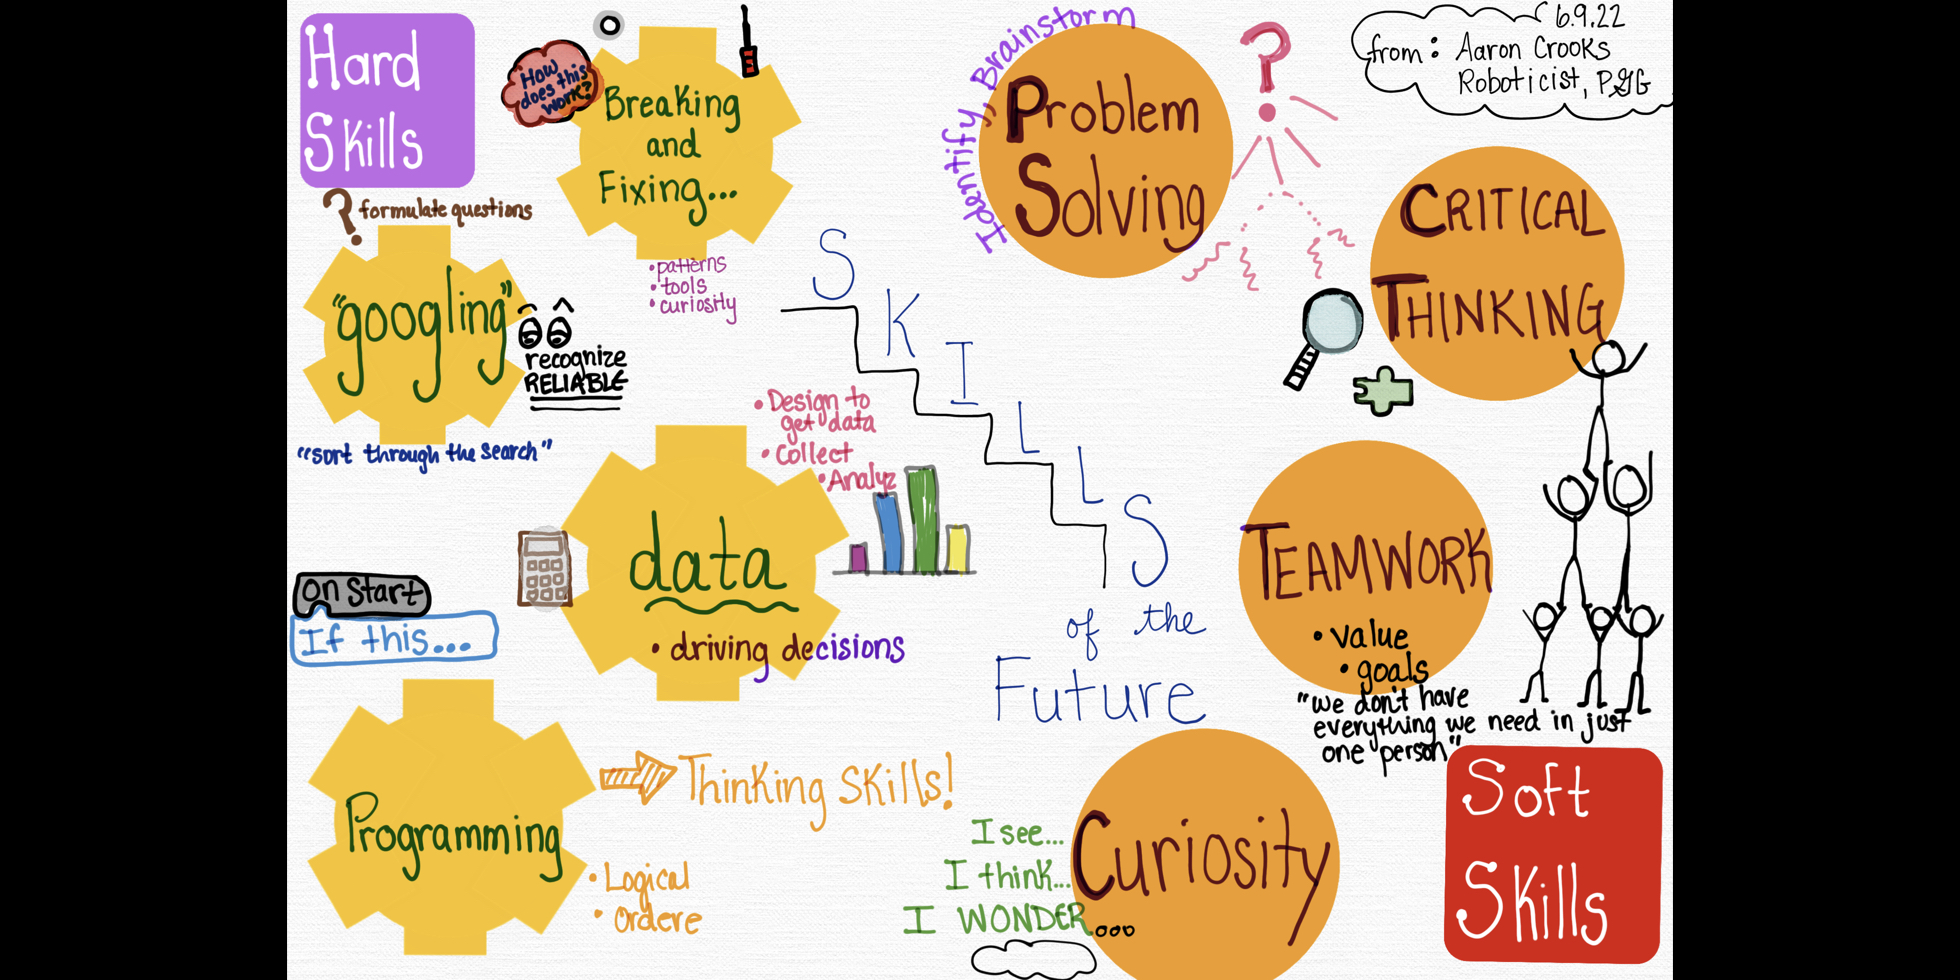 This sketch note shows the hard and soft skills discussed.